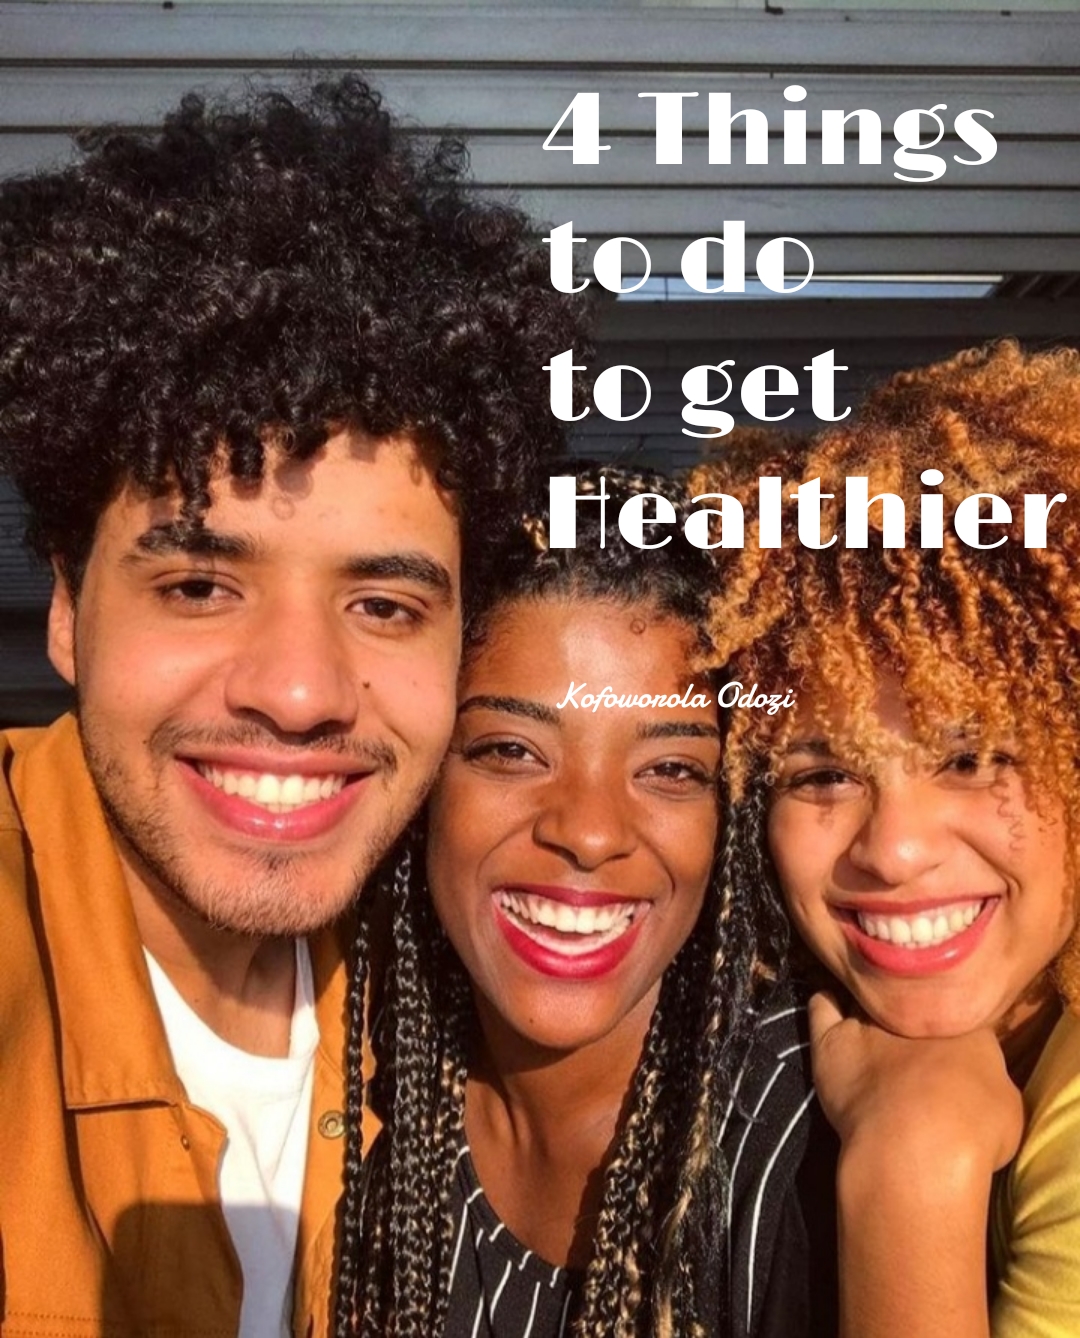 4 Things to do to get healthier